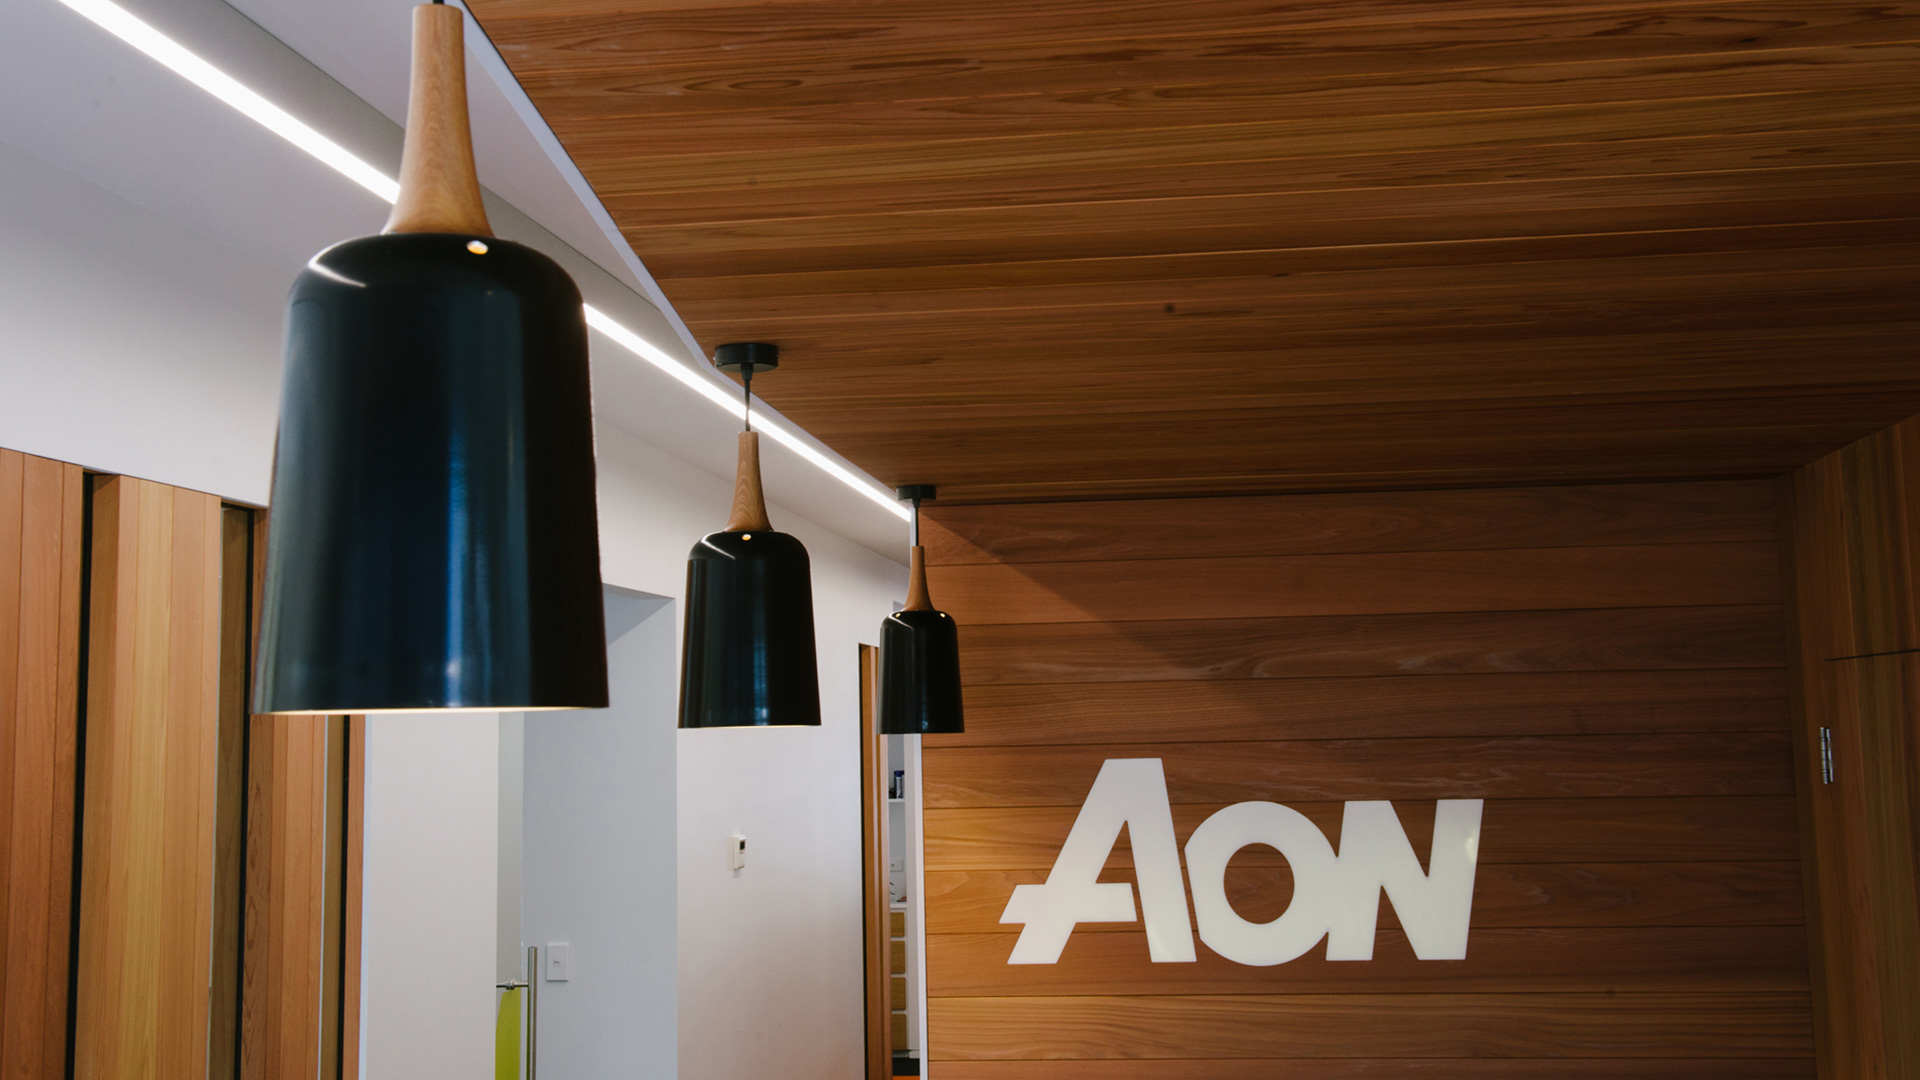 Aon New Plymouth designed by Matz Architects